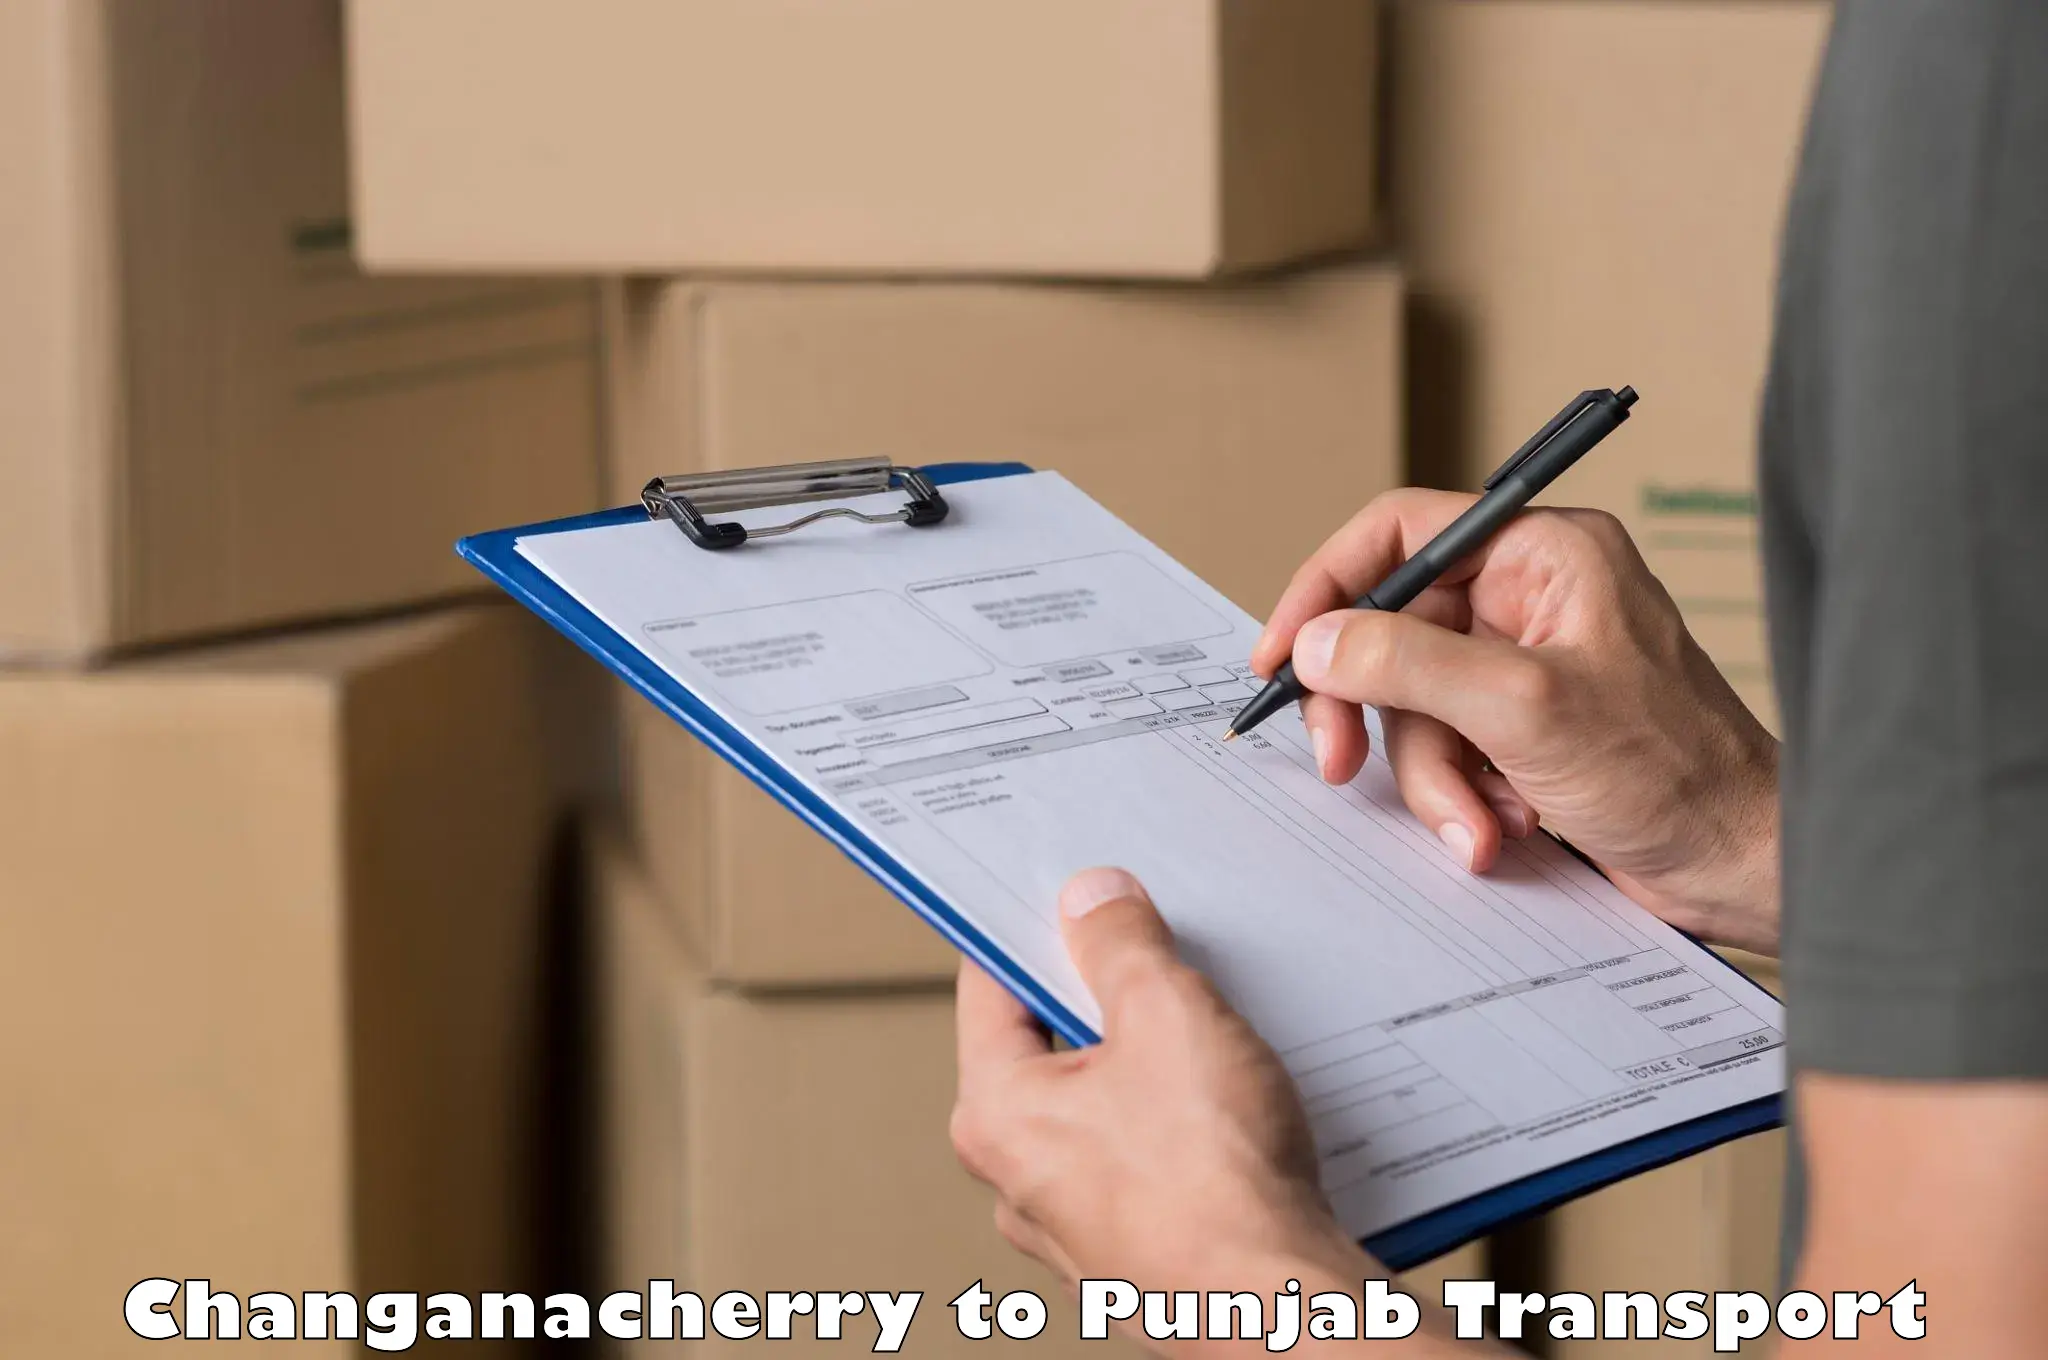 Container transport service Changanacherry to Amritsar